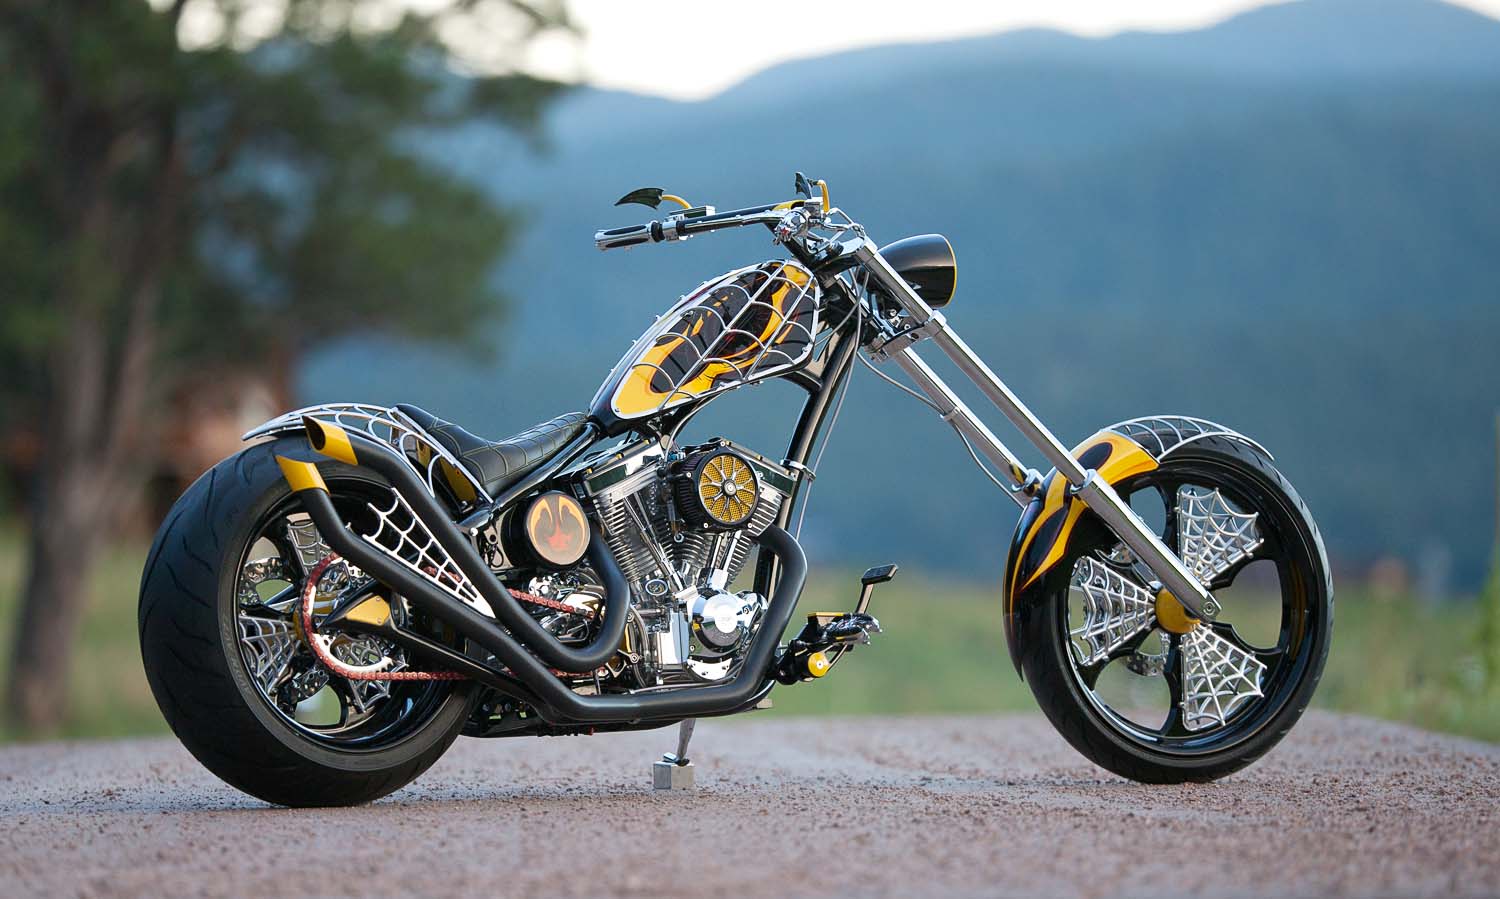 You Have Read This Article With The Title American Choppers Can